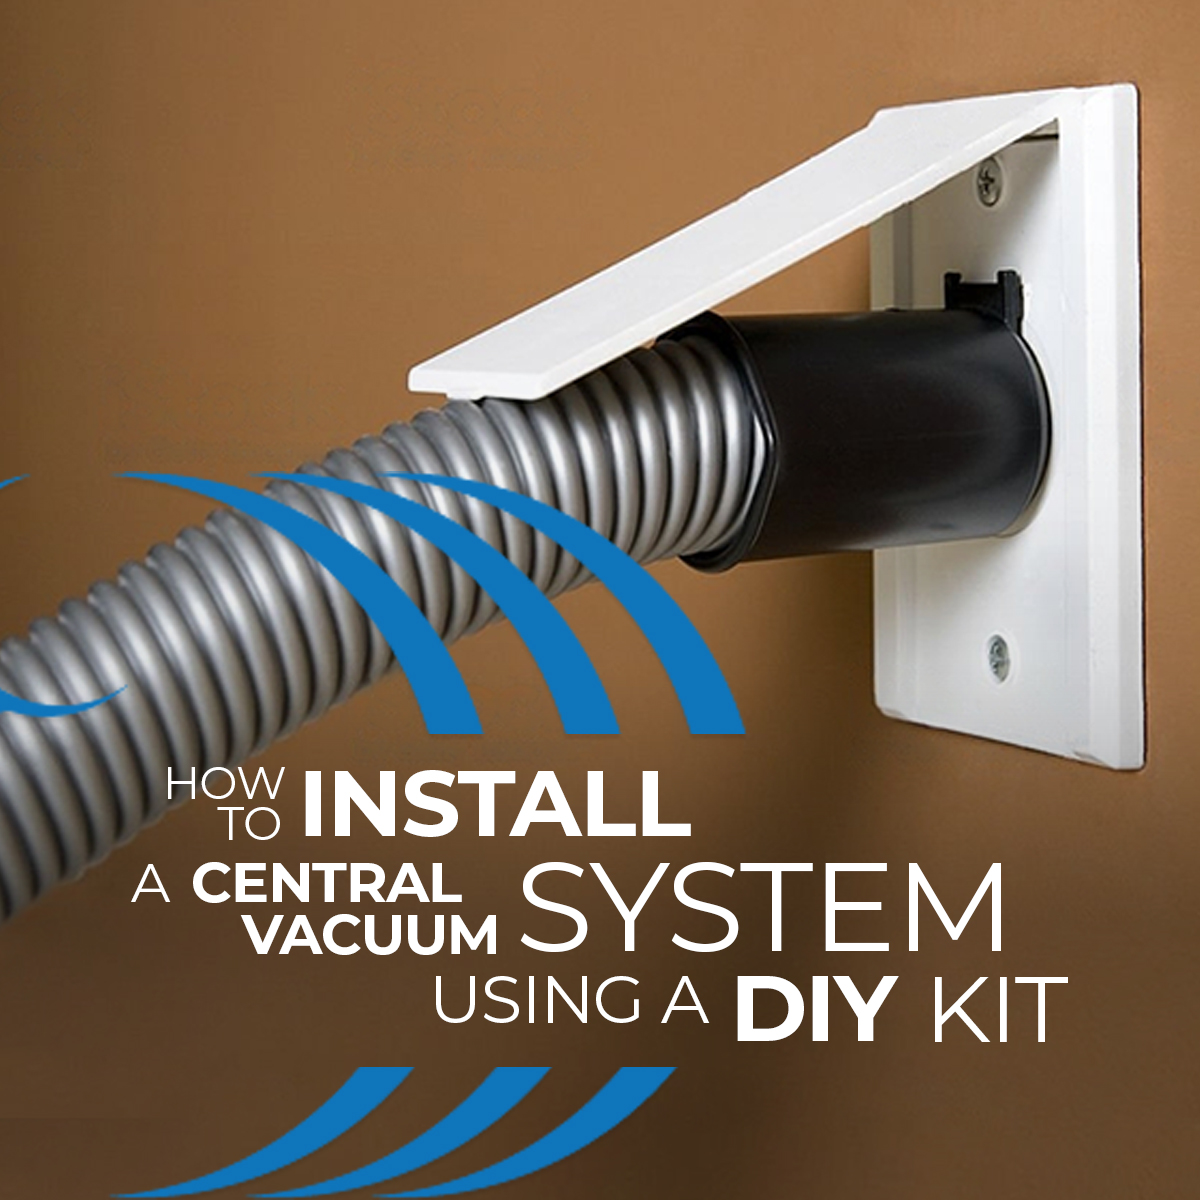 How to install a central vacuum system using a DIY Kit